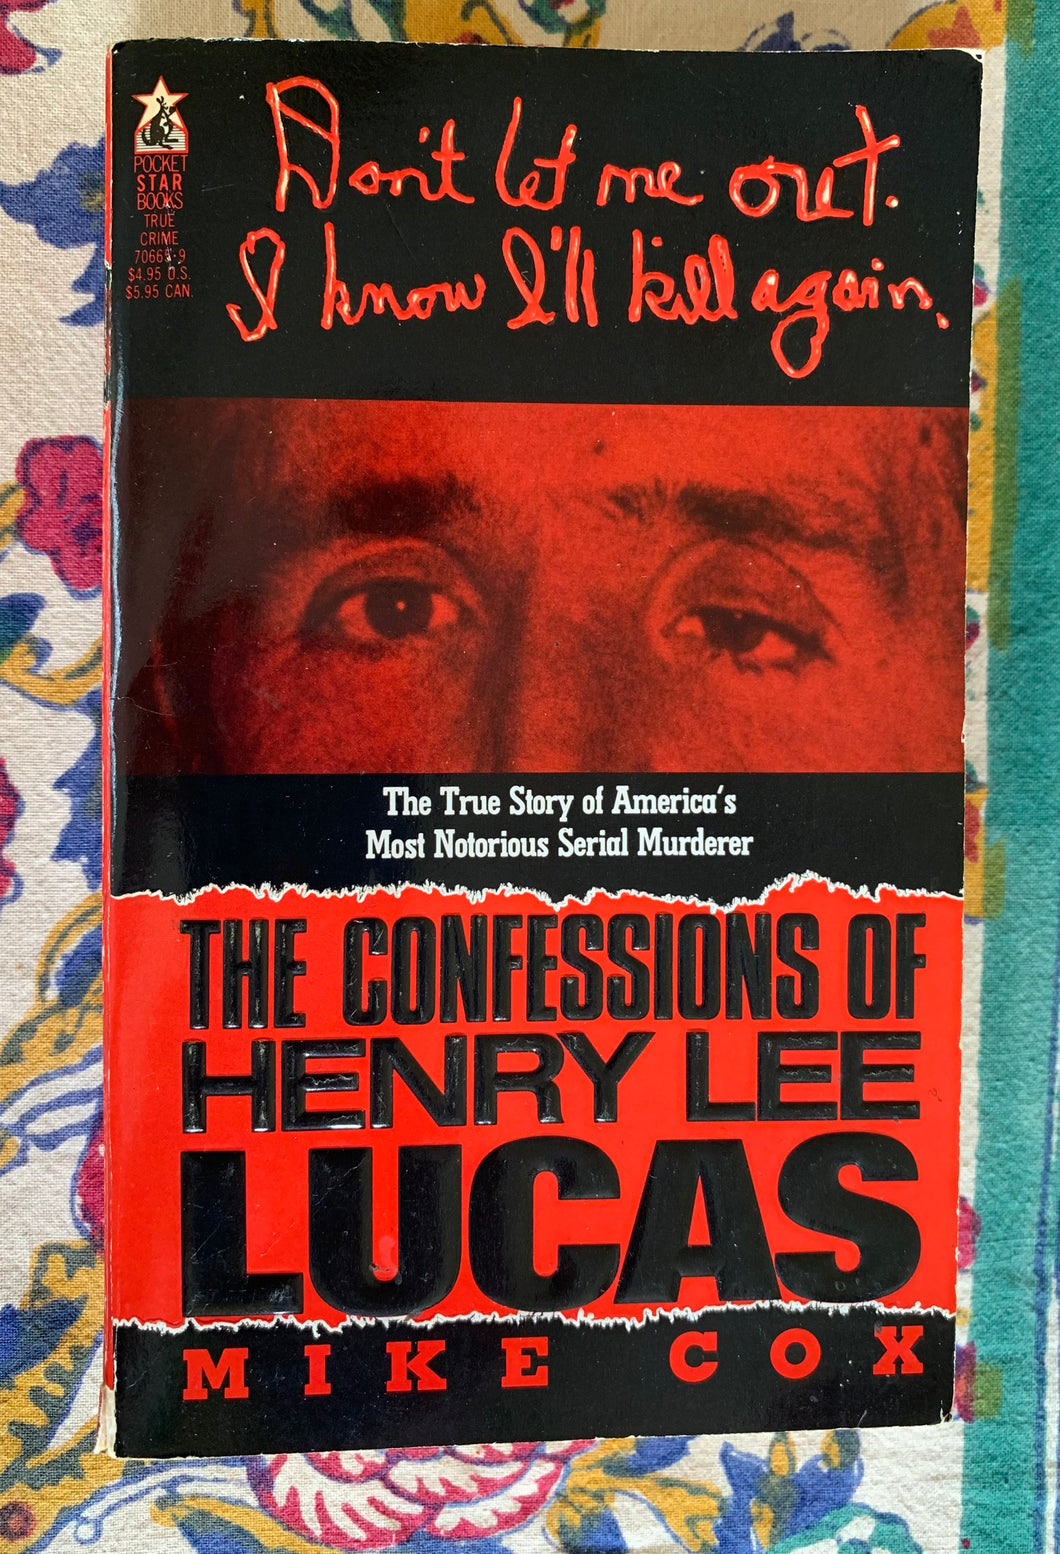 The Confessions of Henry Lee Lucas: The True Story of America's Most Notorious Serial Murderer